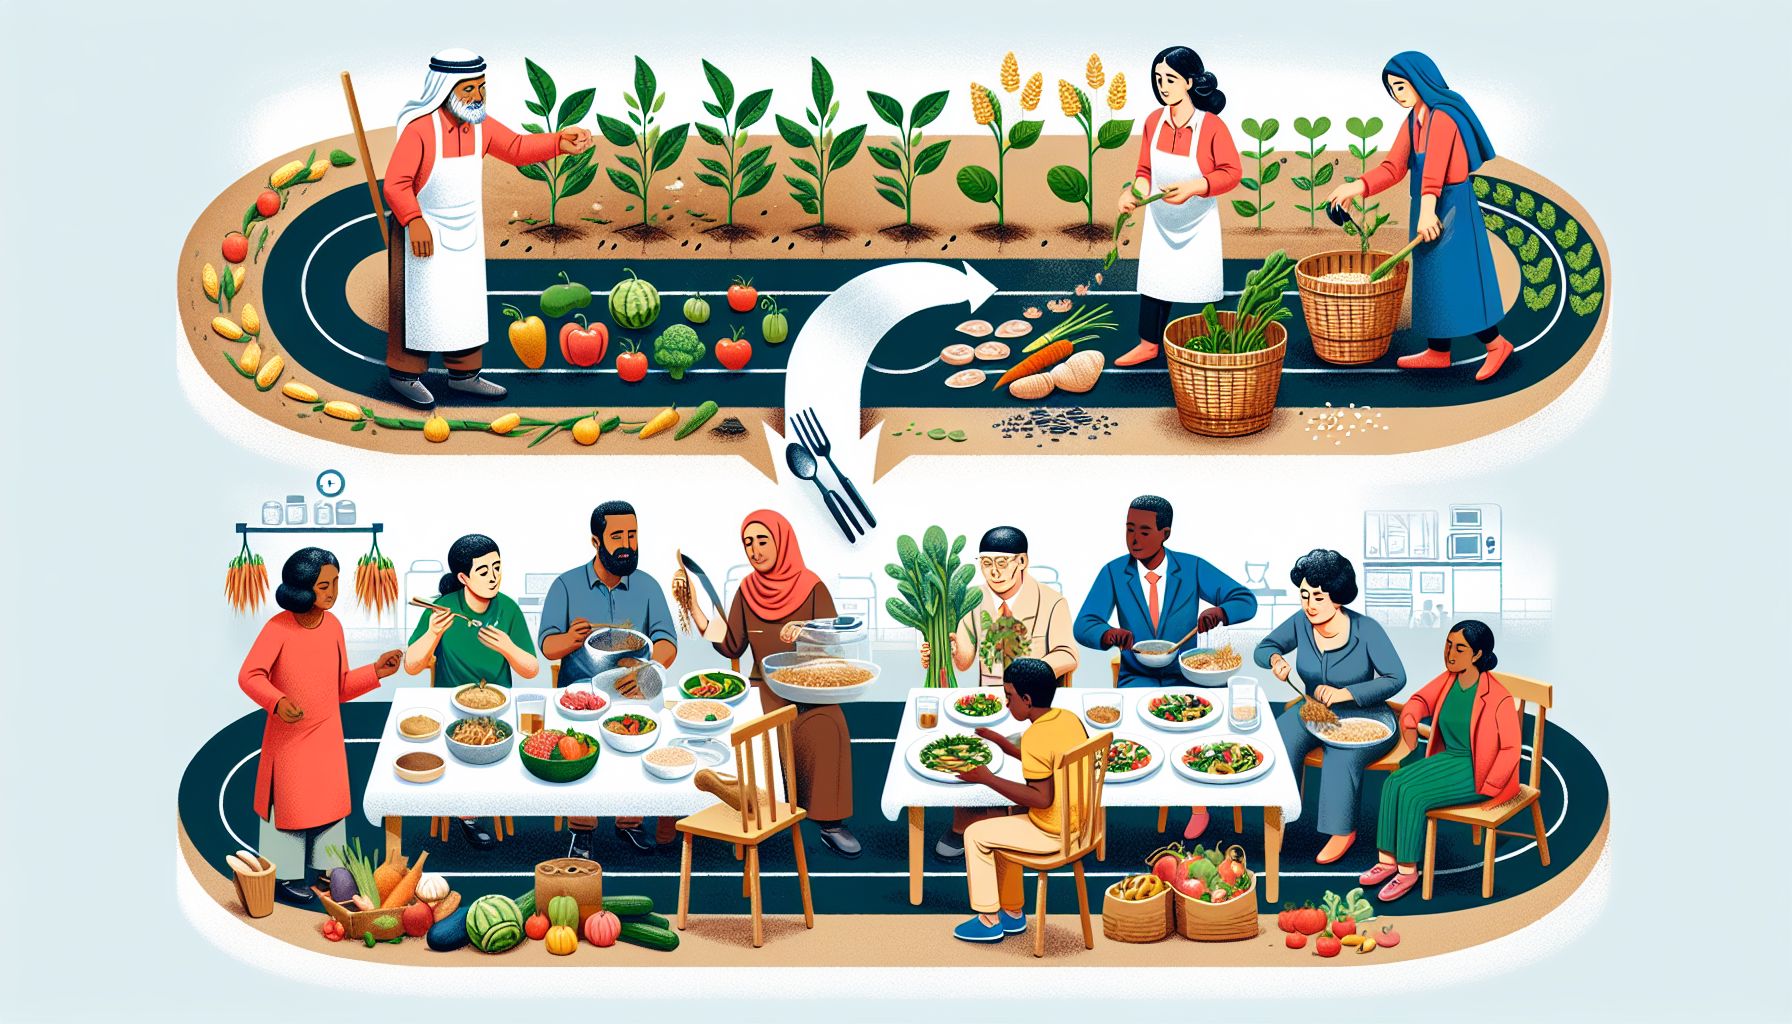 Taking the Business of Food Education From Farm to Fork